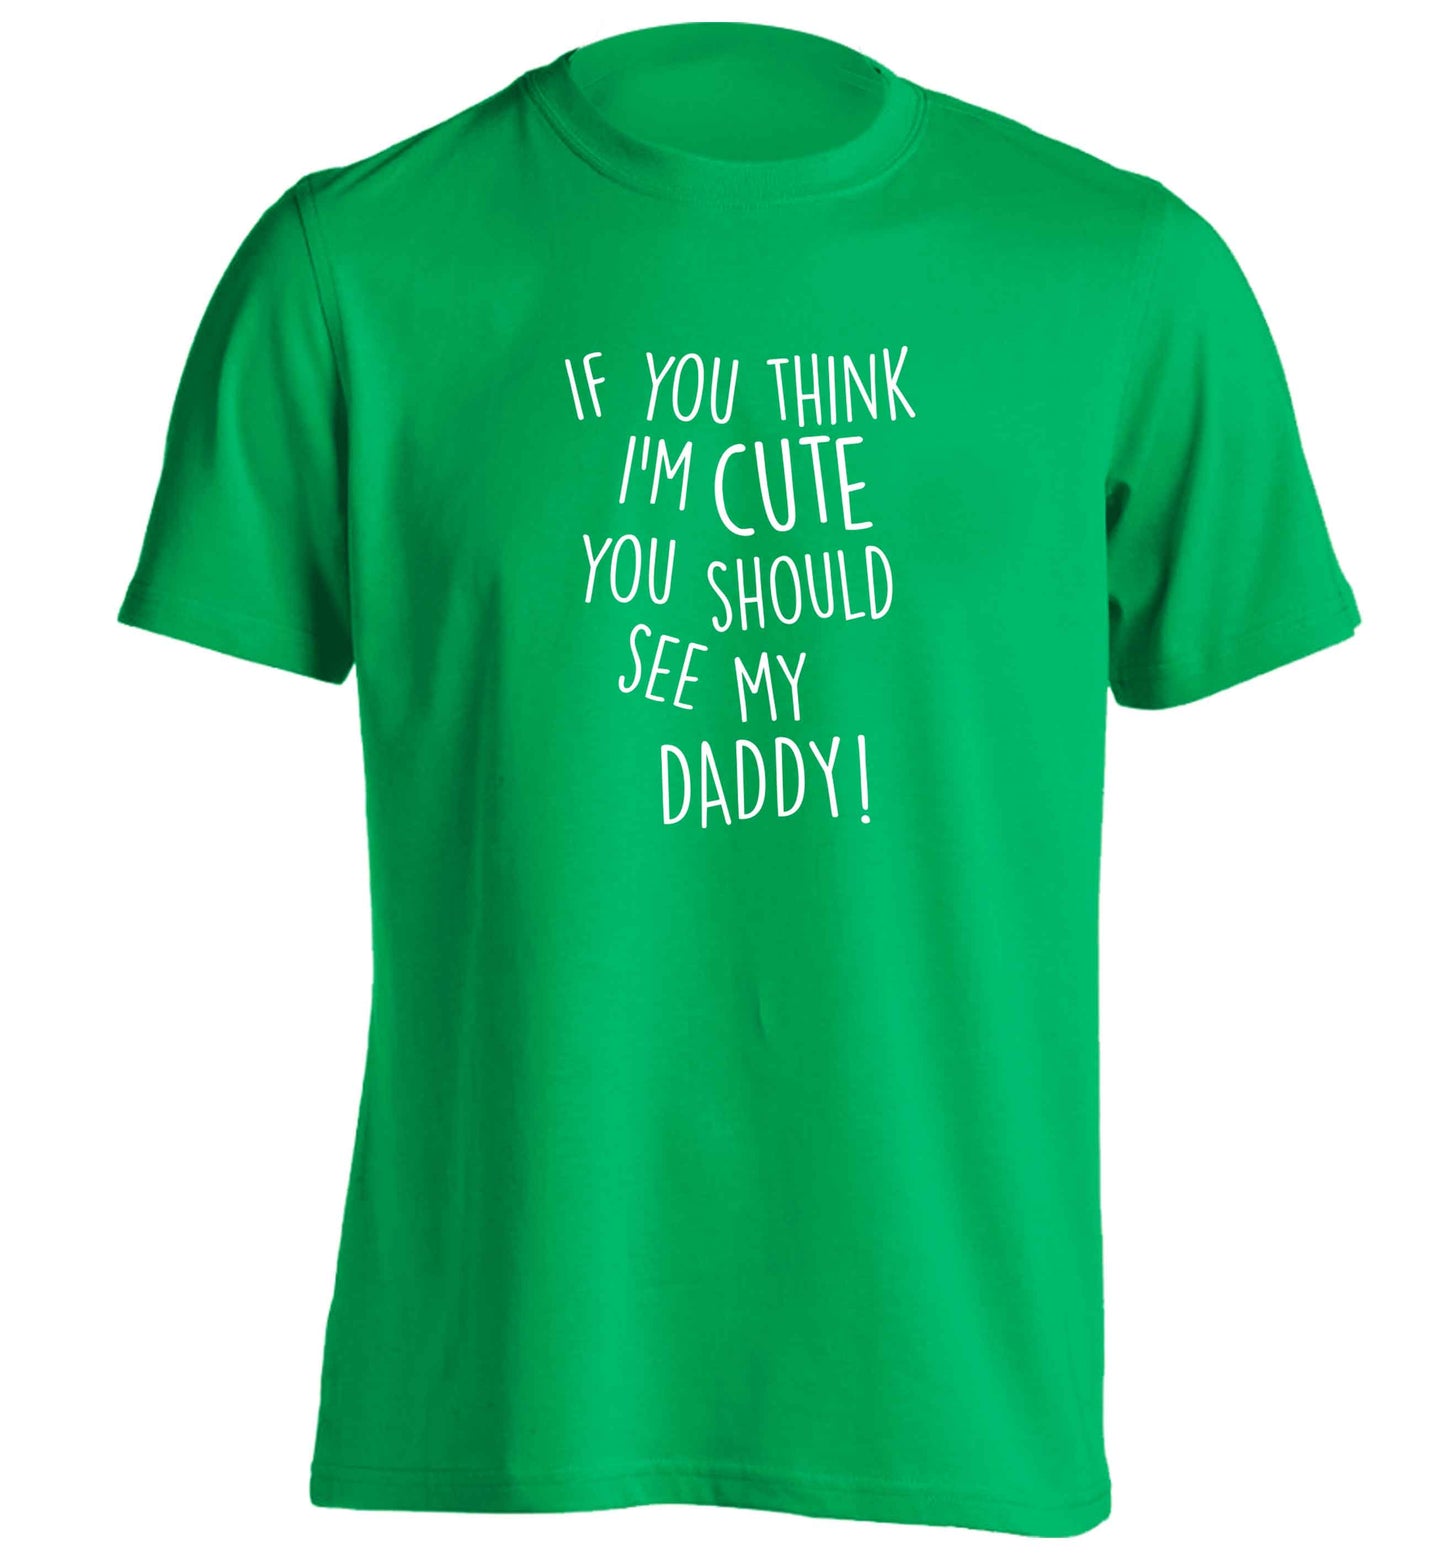 If you think I'm cute you should see my daddy adults unisex green Tshirt 2XL